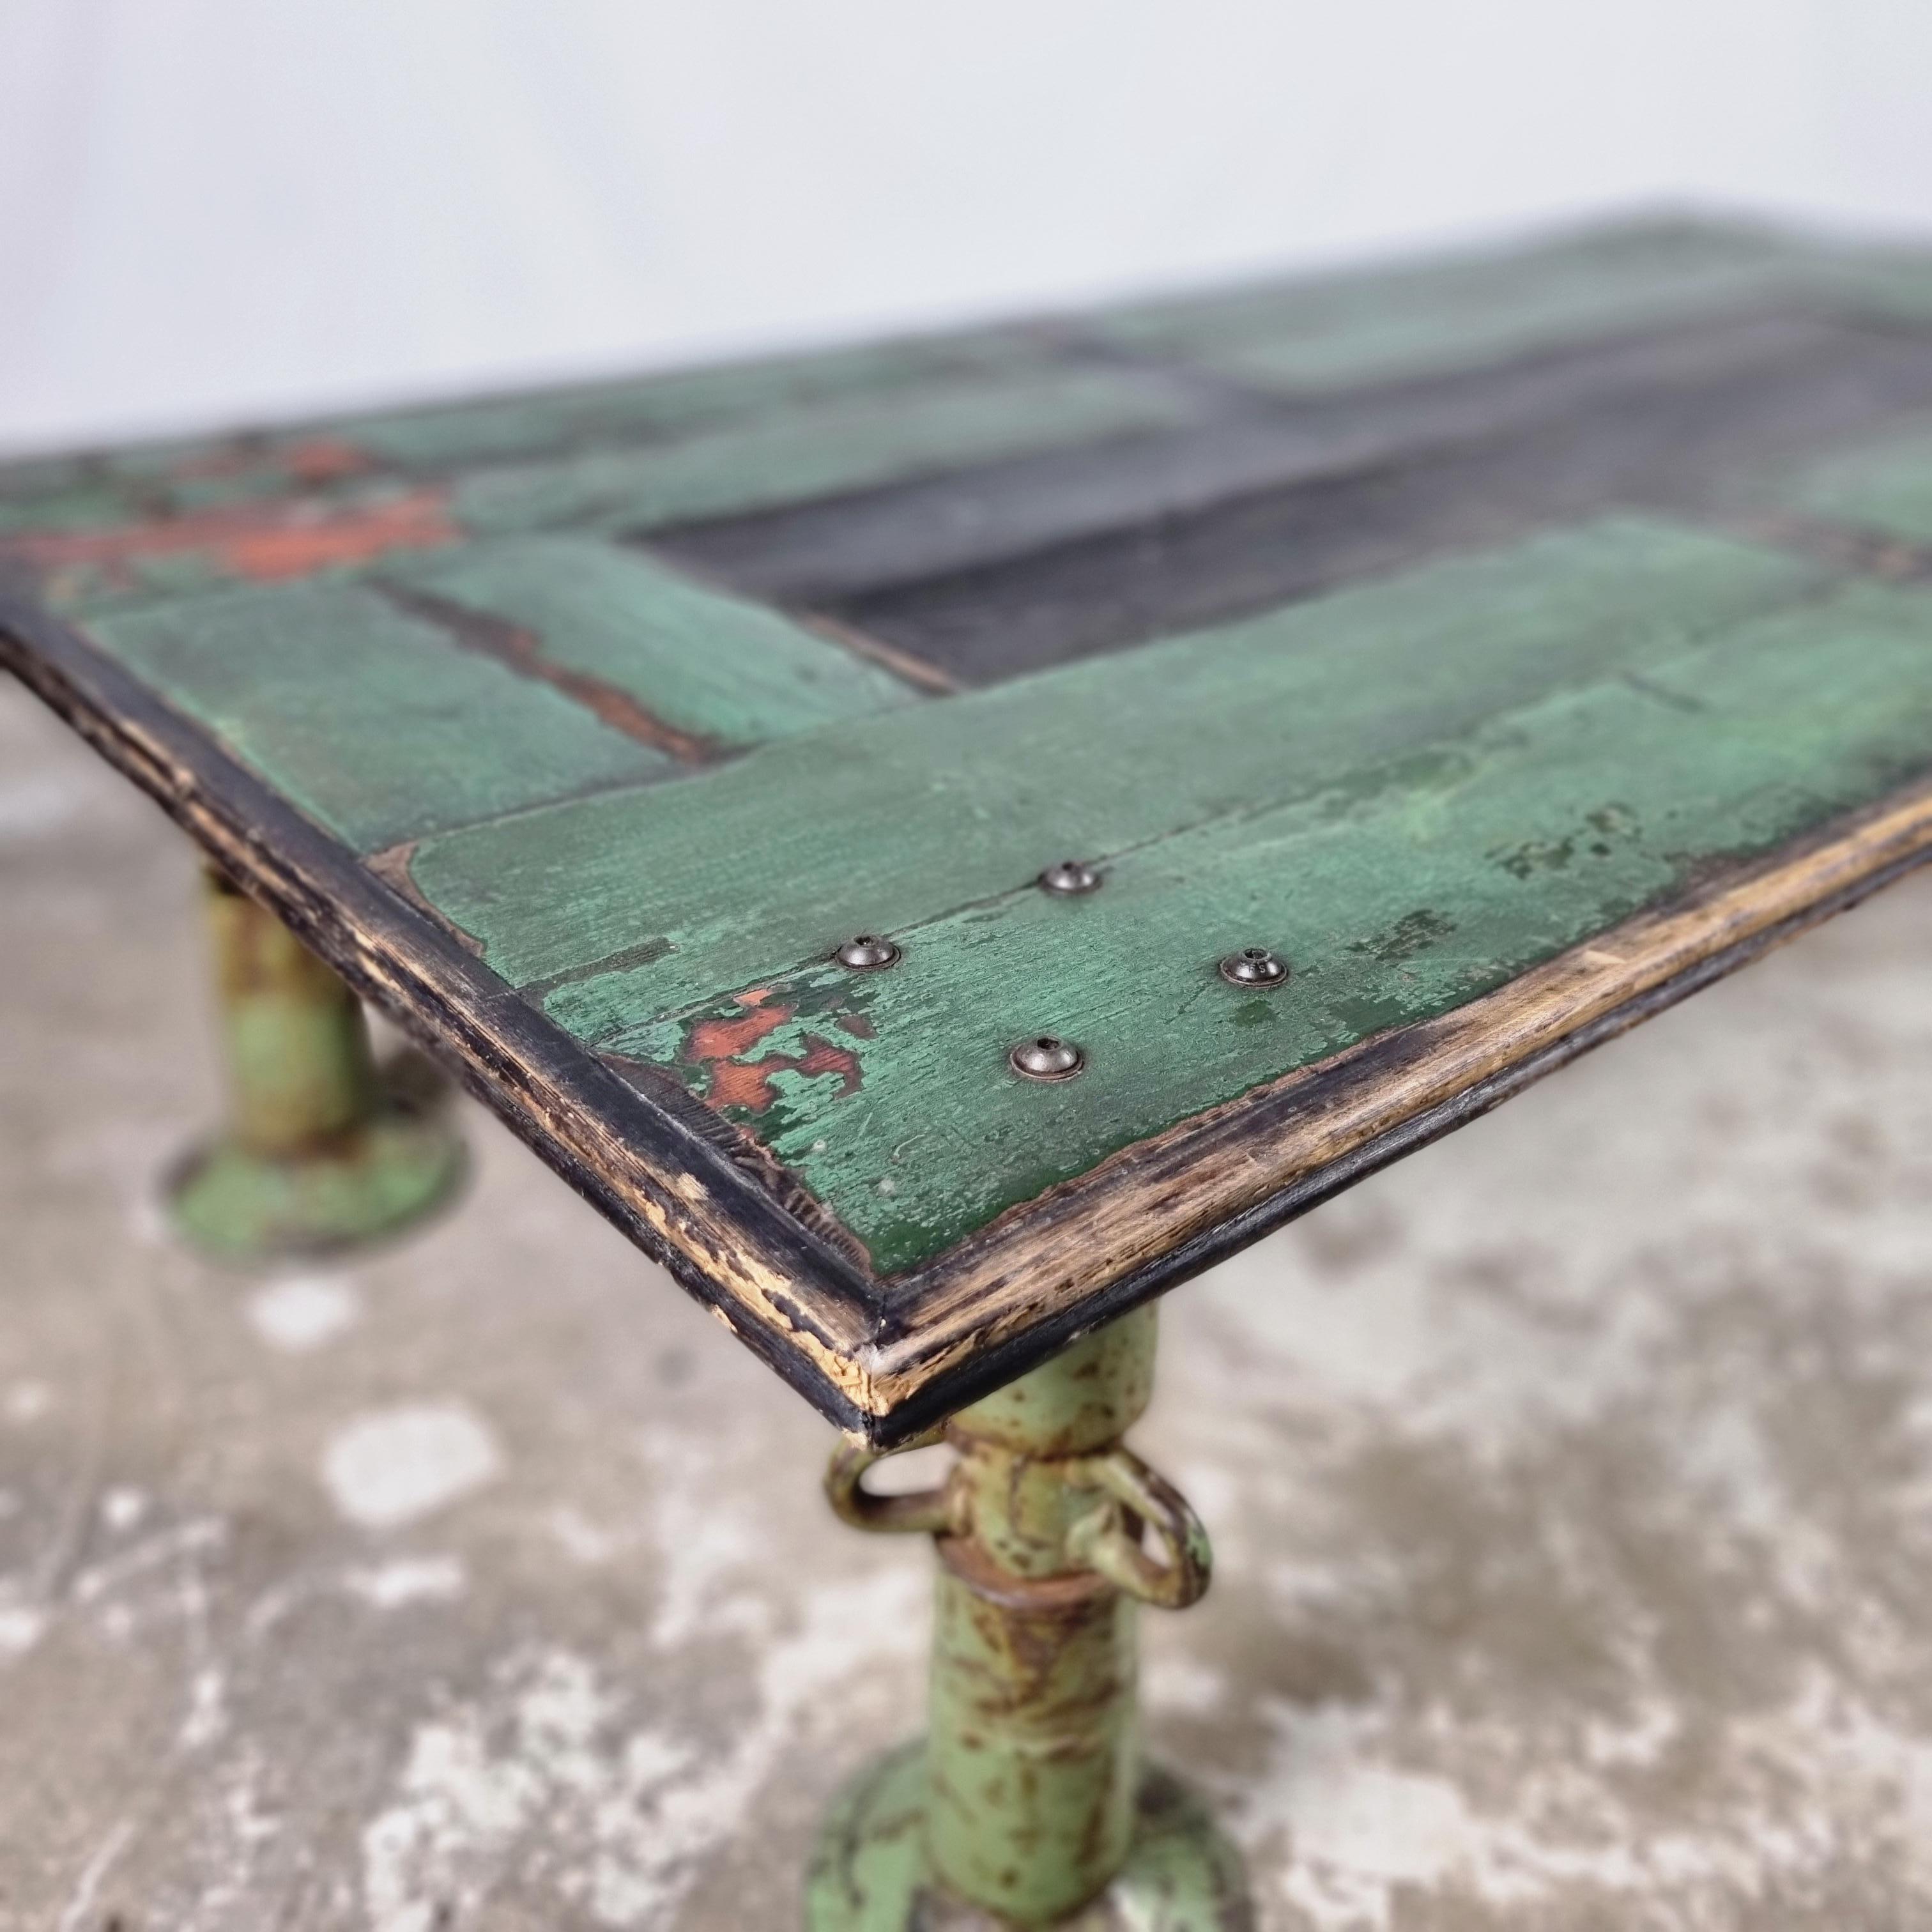 Iron Large heavy industrial vintage coffee table from reclaimed wood, cast iron legs